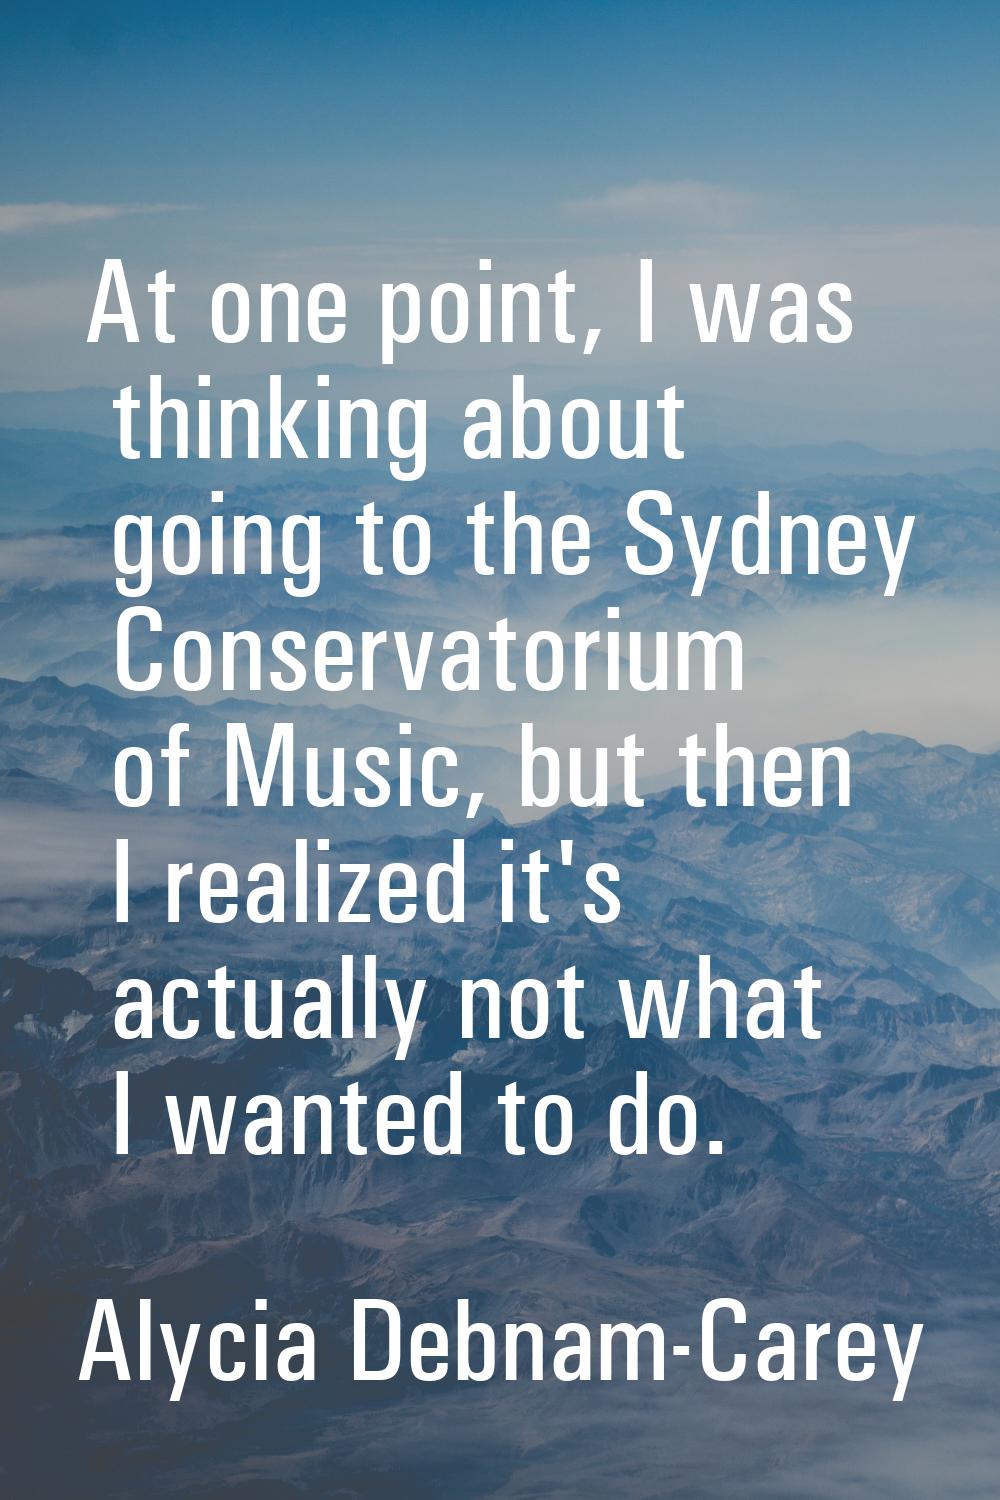 At one point, I was thinking about going to the Sydney Conservatorium of Music, but then I realized